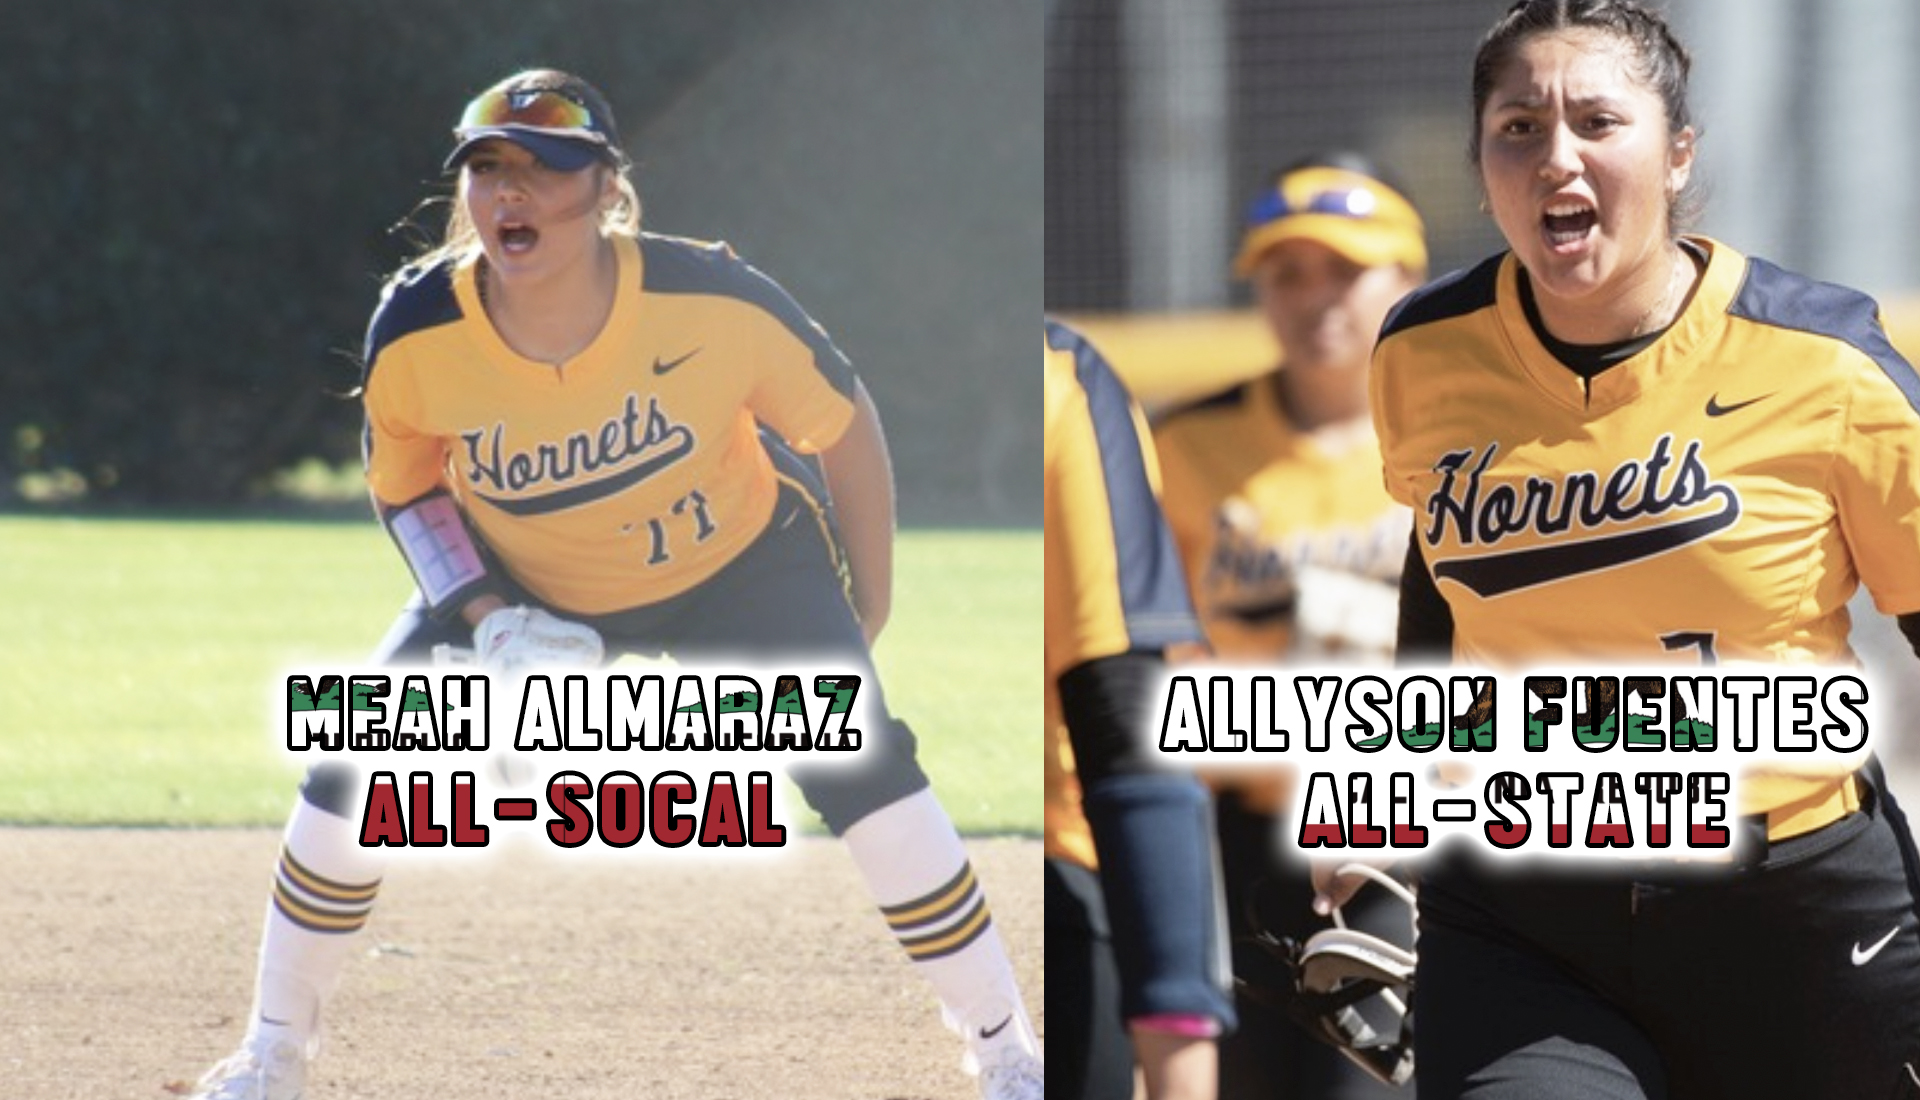 ALL-SOCAL & ALL-STATE HORNETS